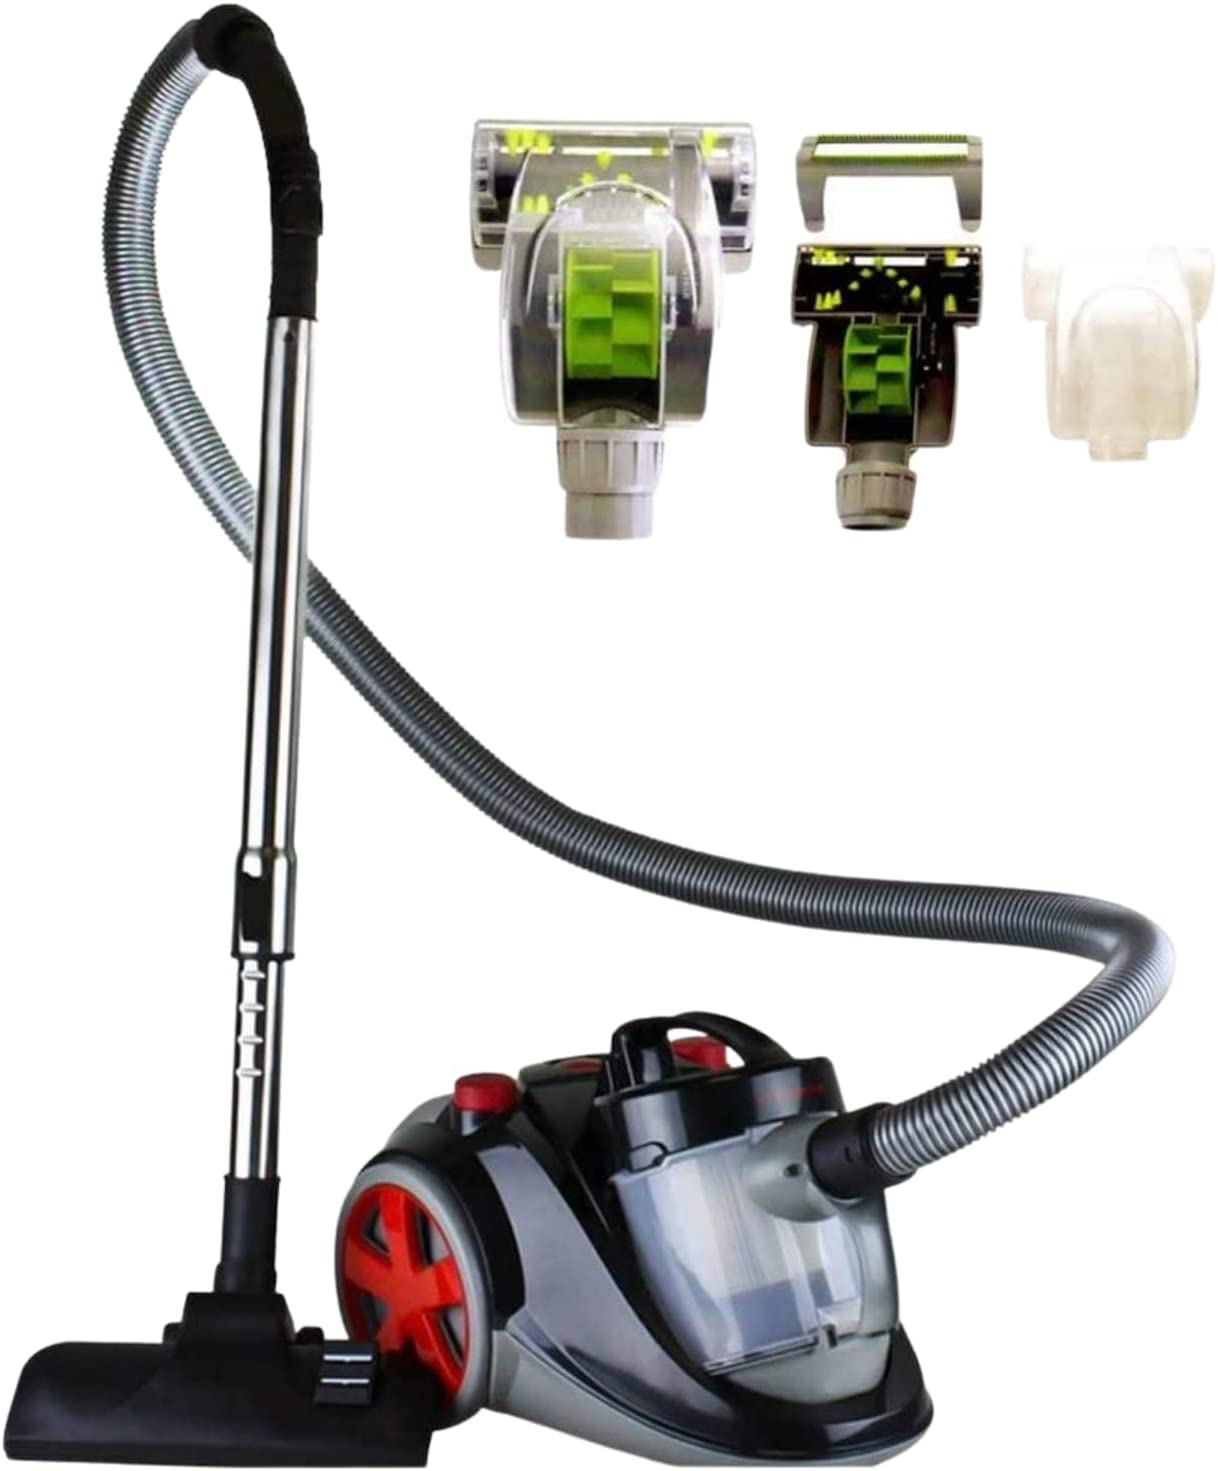 Ovente Bagless Canister Vacuum with HEPA Filter